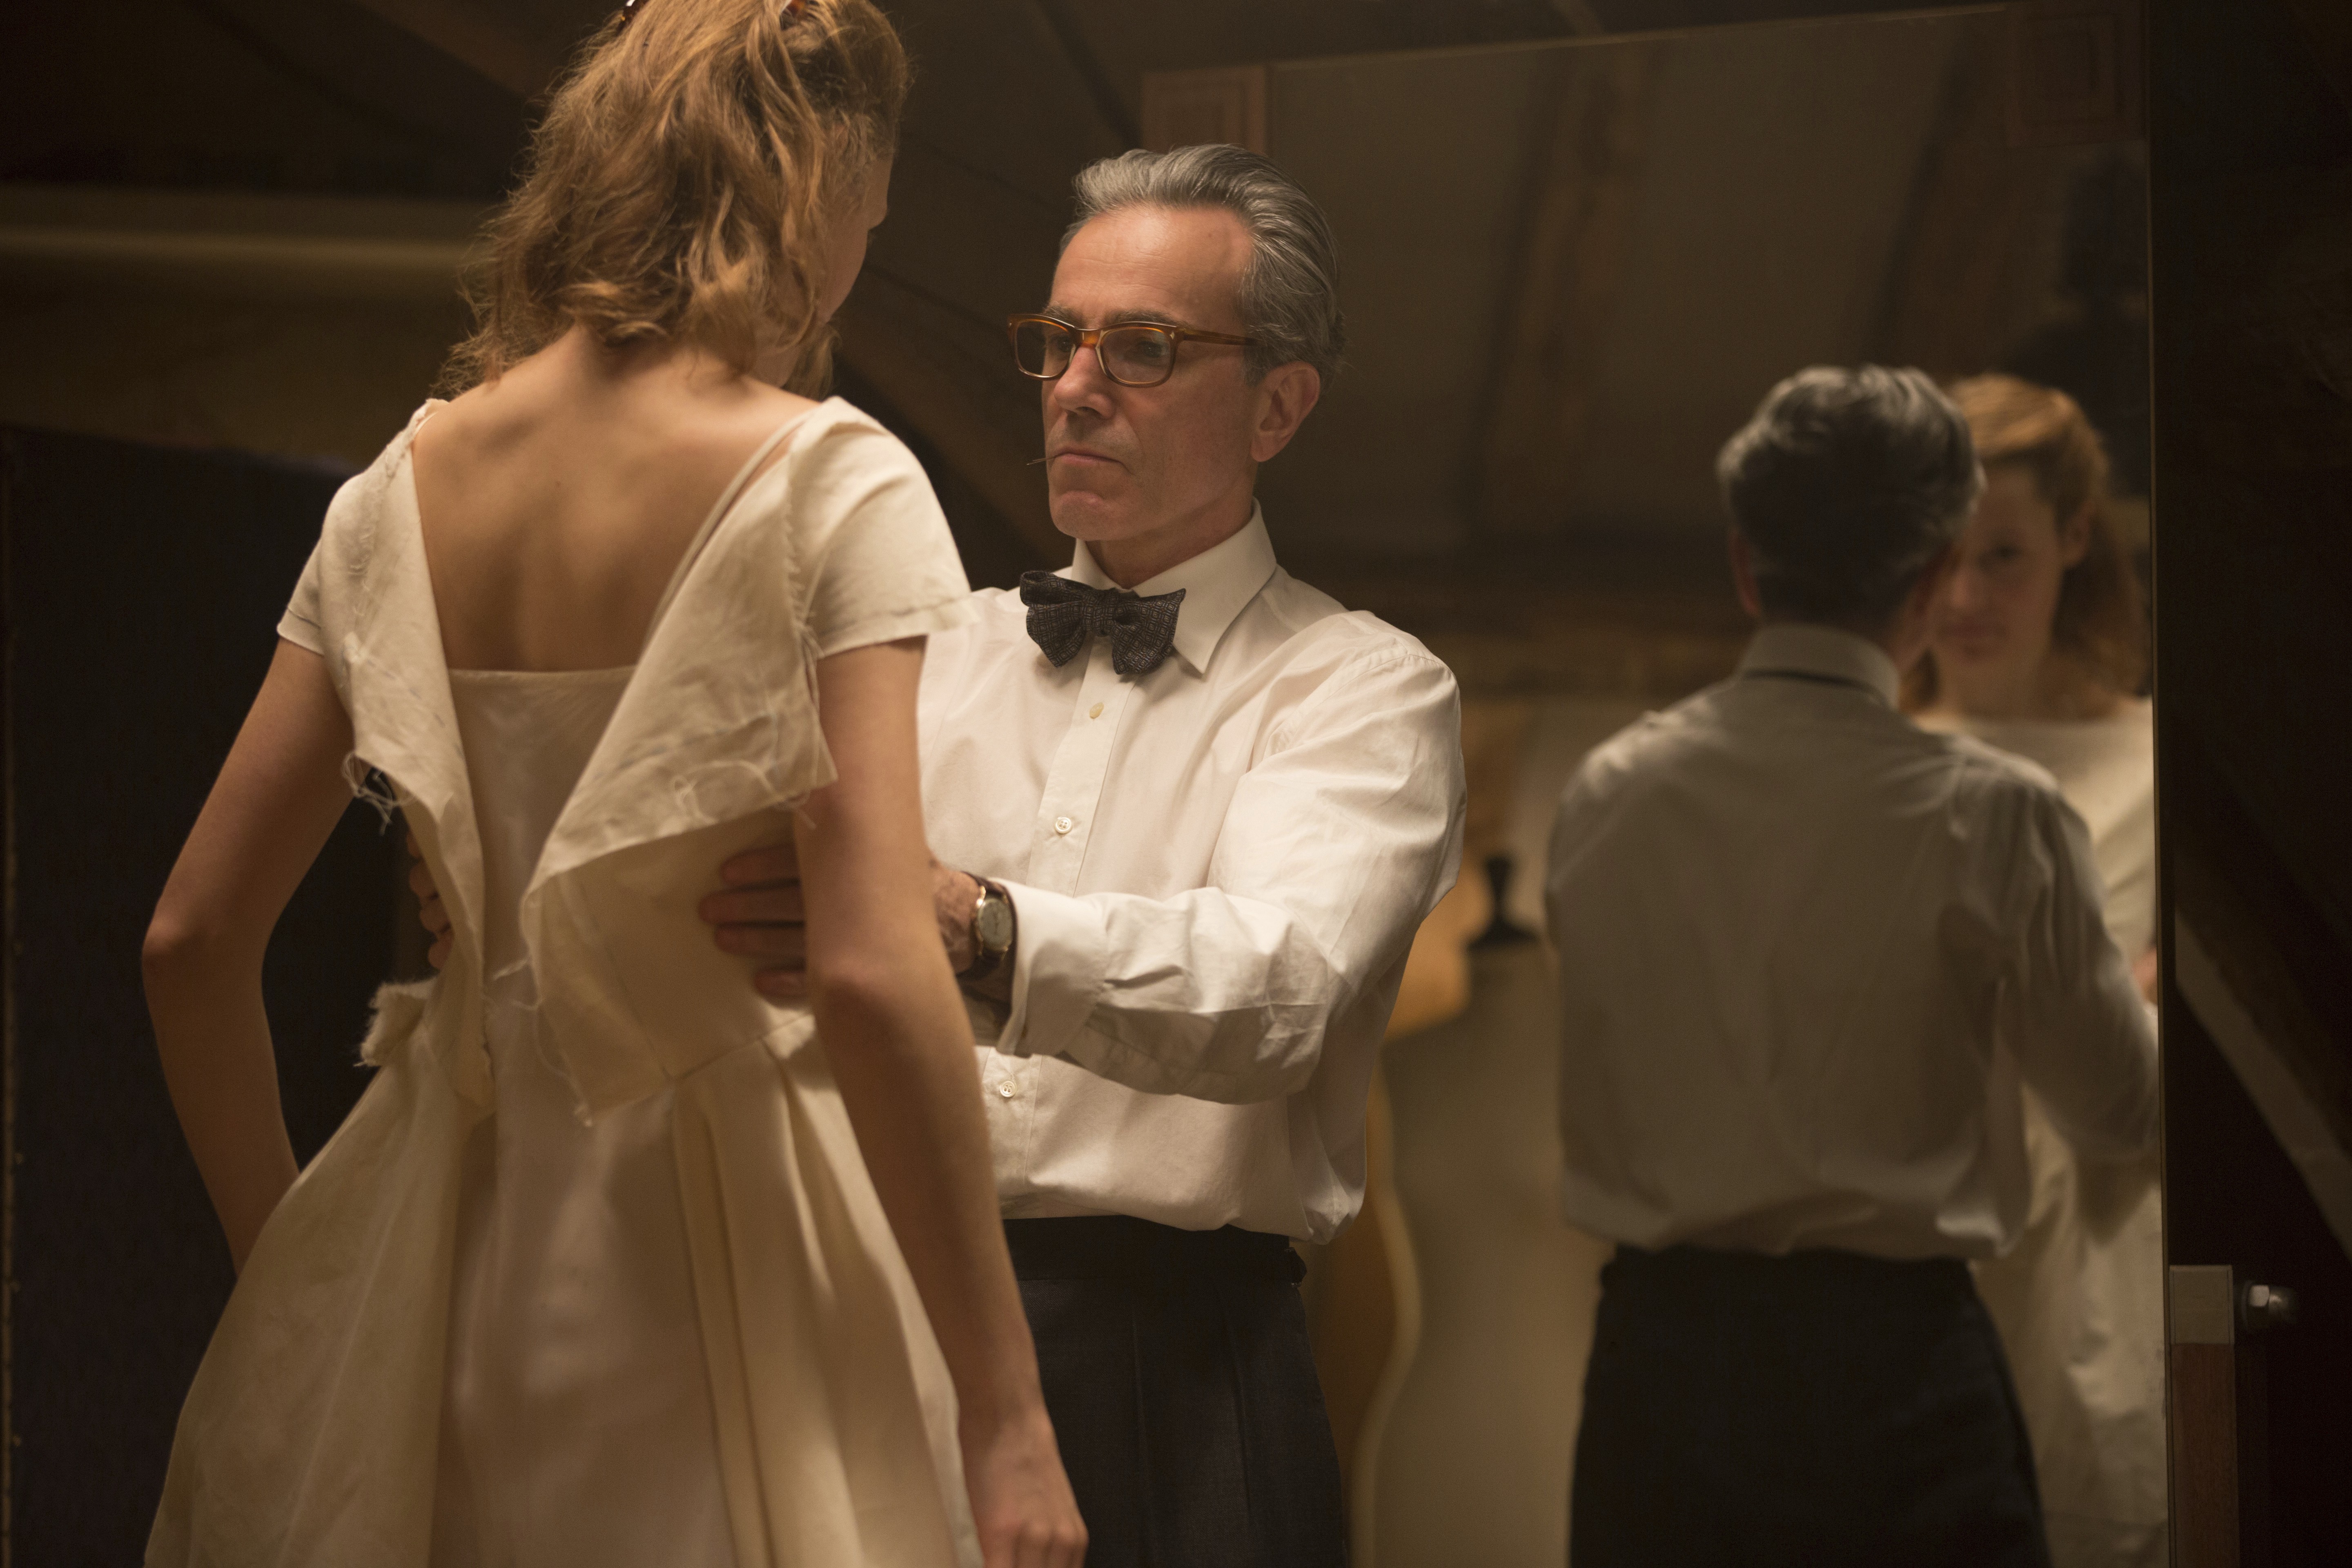 Vicky Krieps and Daniel Day-Lewis appear in Phantom Thread, which is expected to open in Hong Kong on March 8. Photo: Laurie Sparham/Focus Features via AP